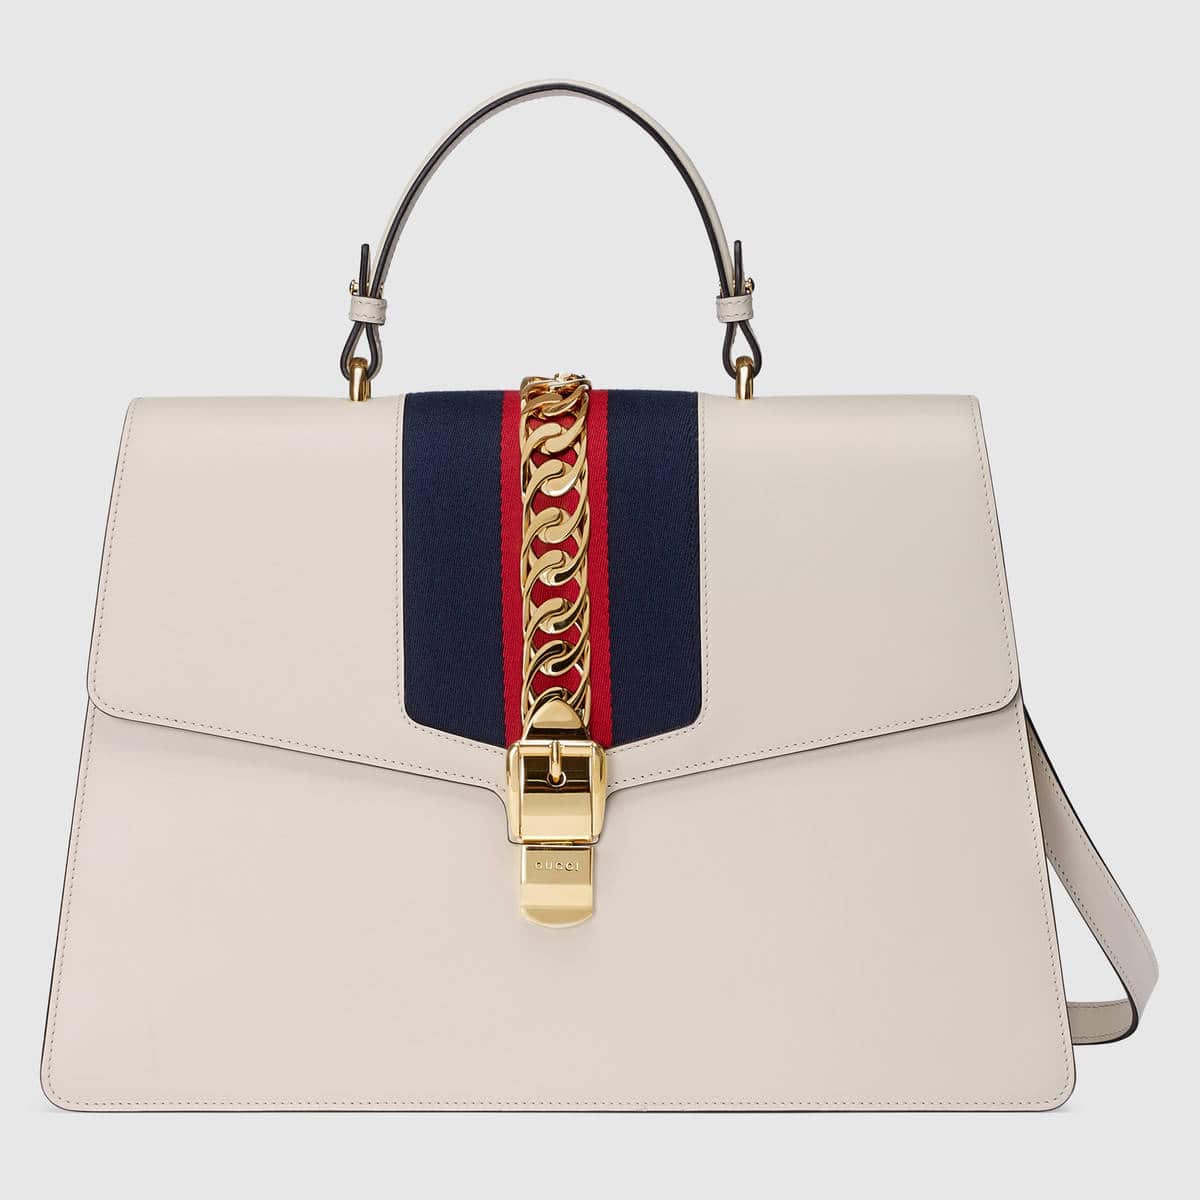 Gucci Bag Price List Reference Guide – Spotted Fashion